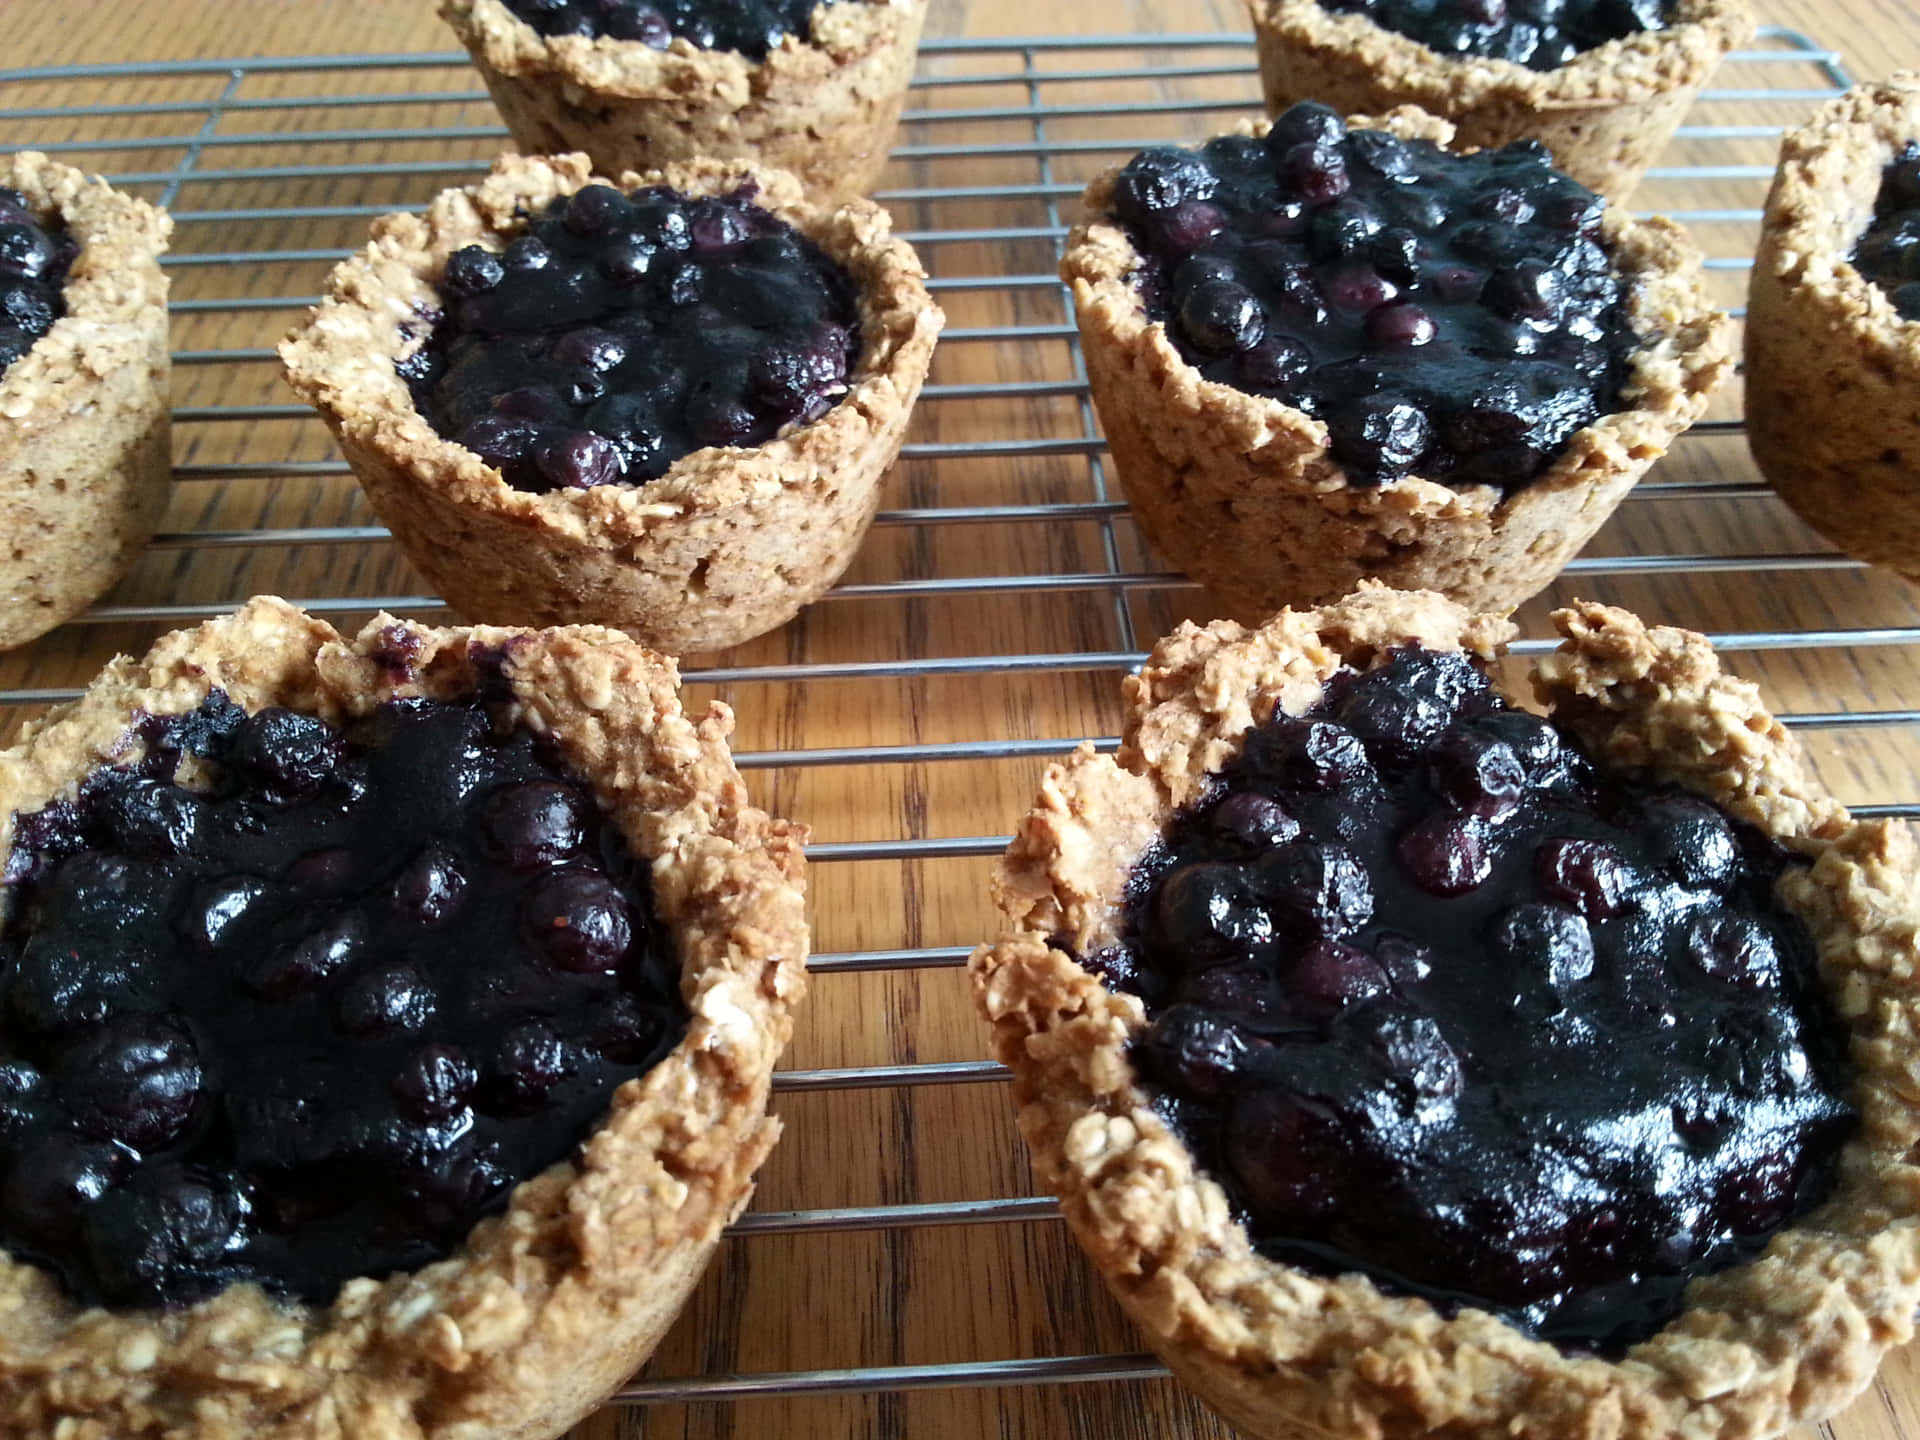 A freshly baked and delicious blueberries tart. Wallpaper